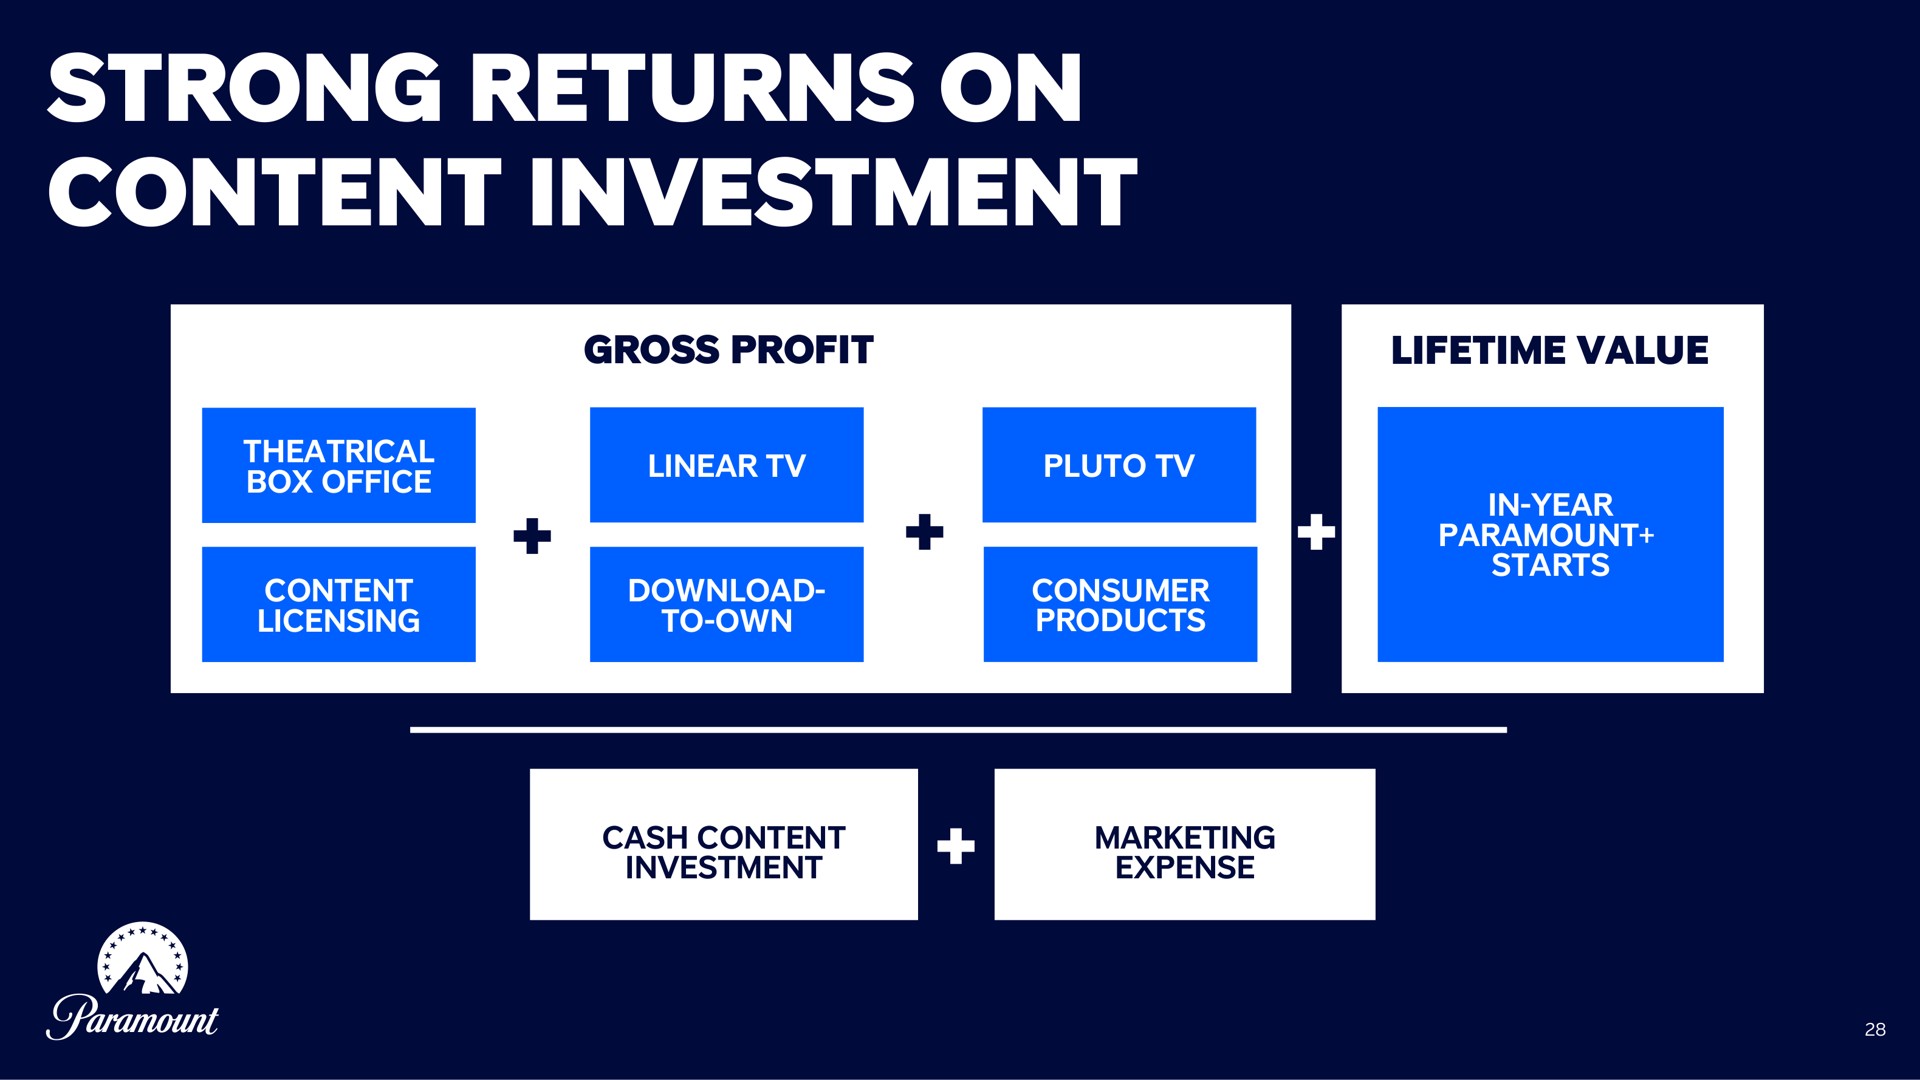 strong returns on content investment | Paramount